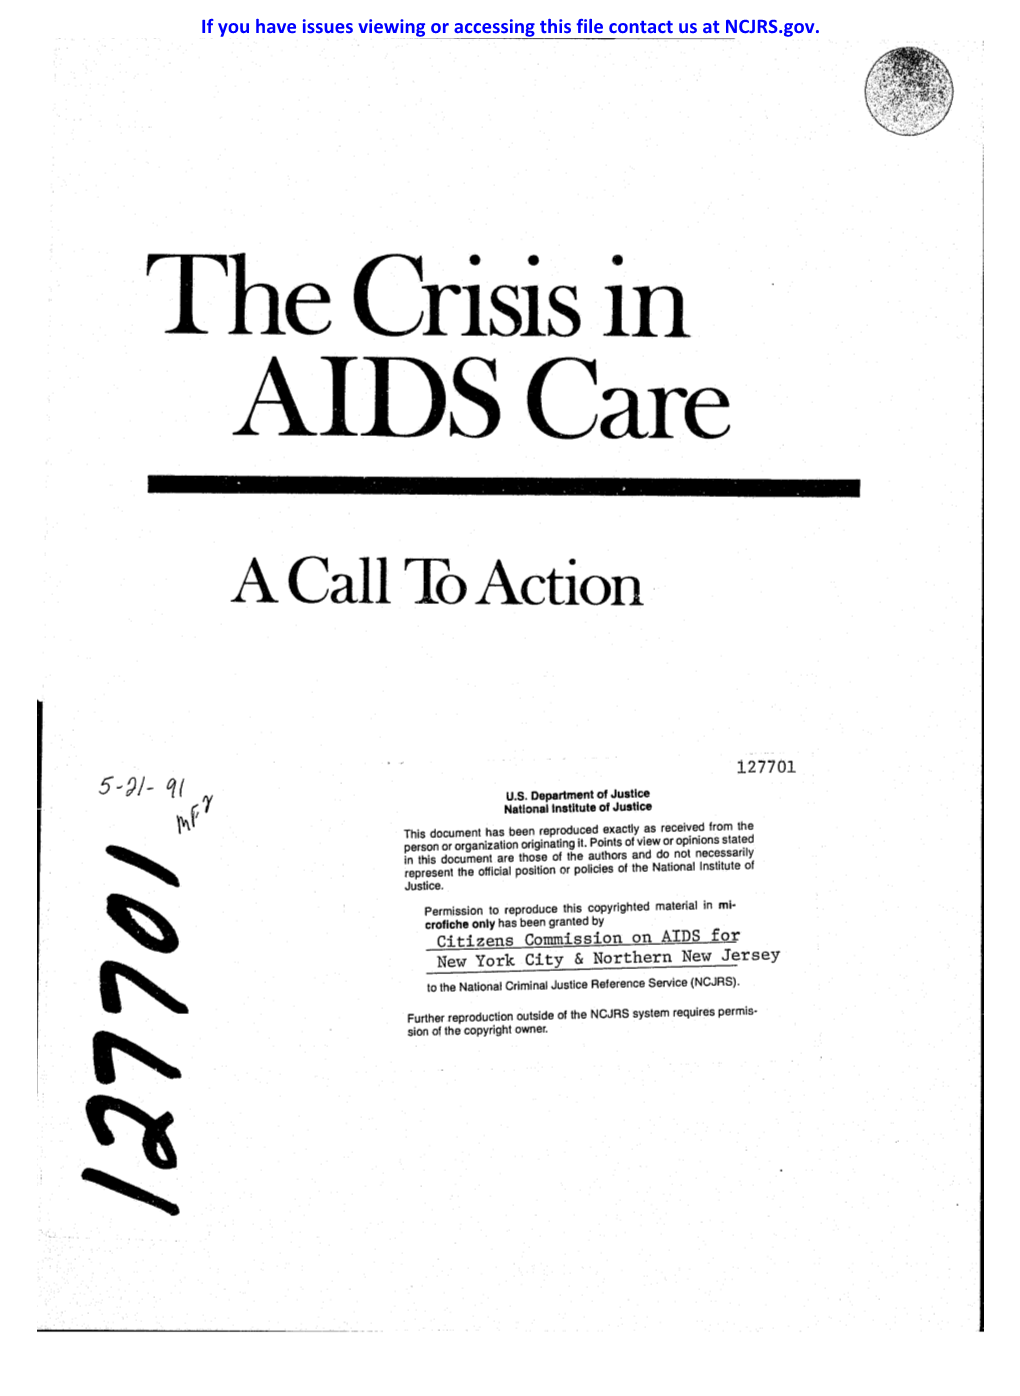 The Crisis in AIDS Care